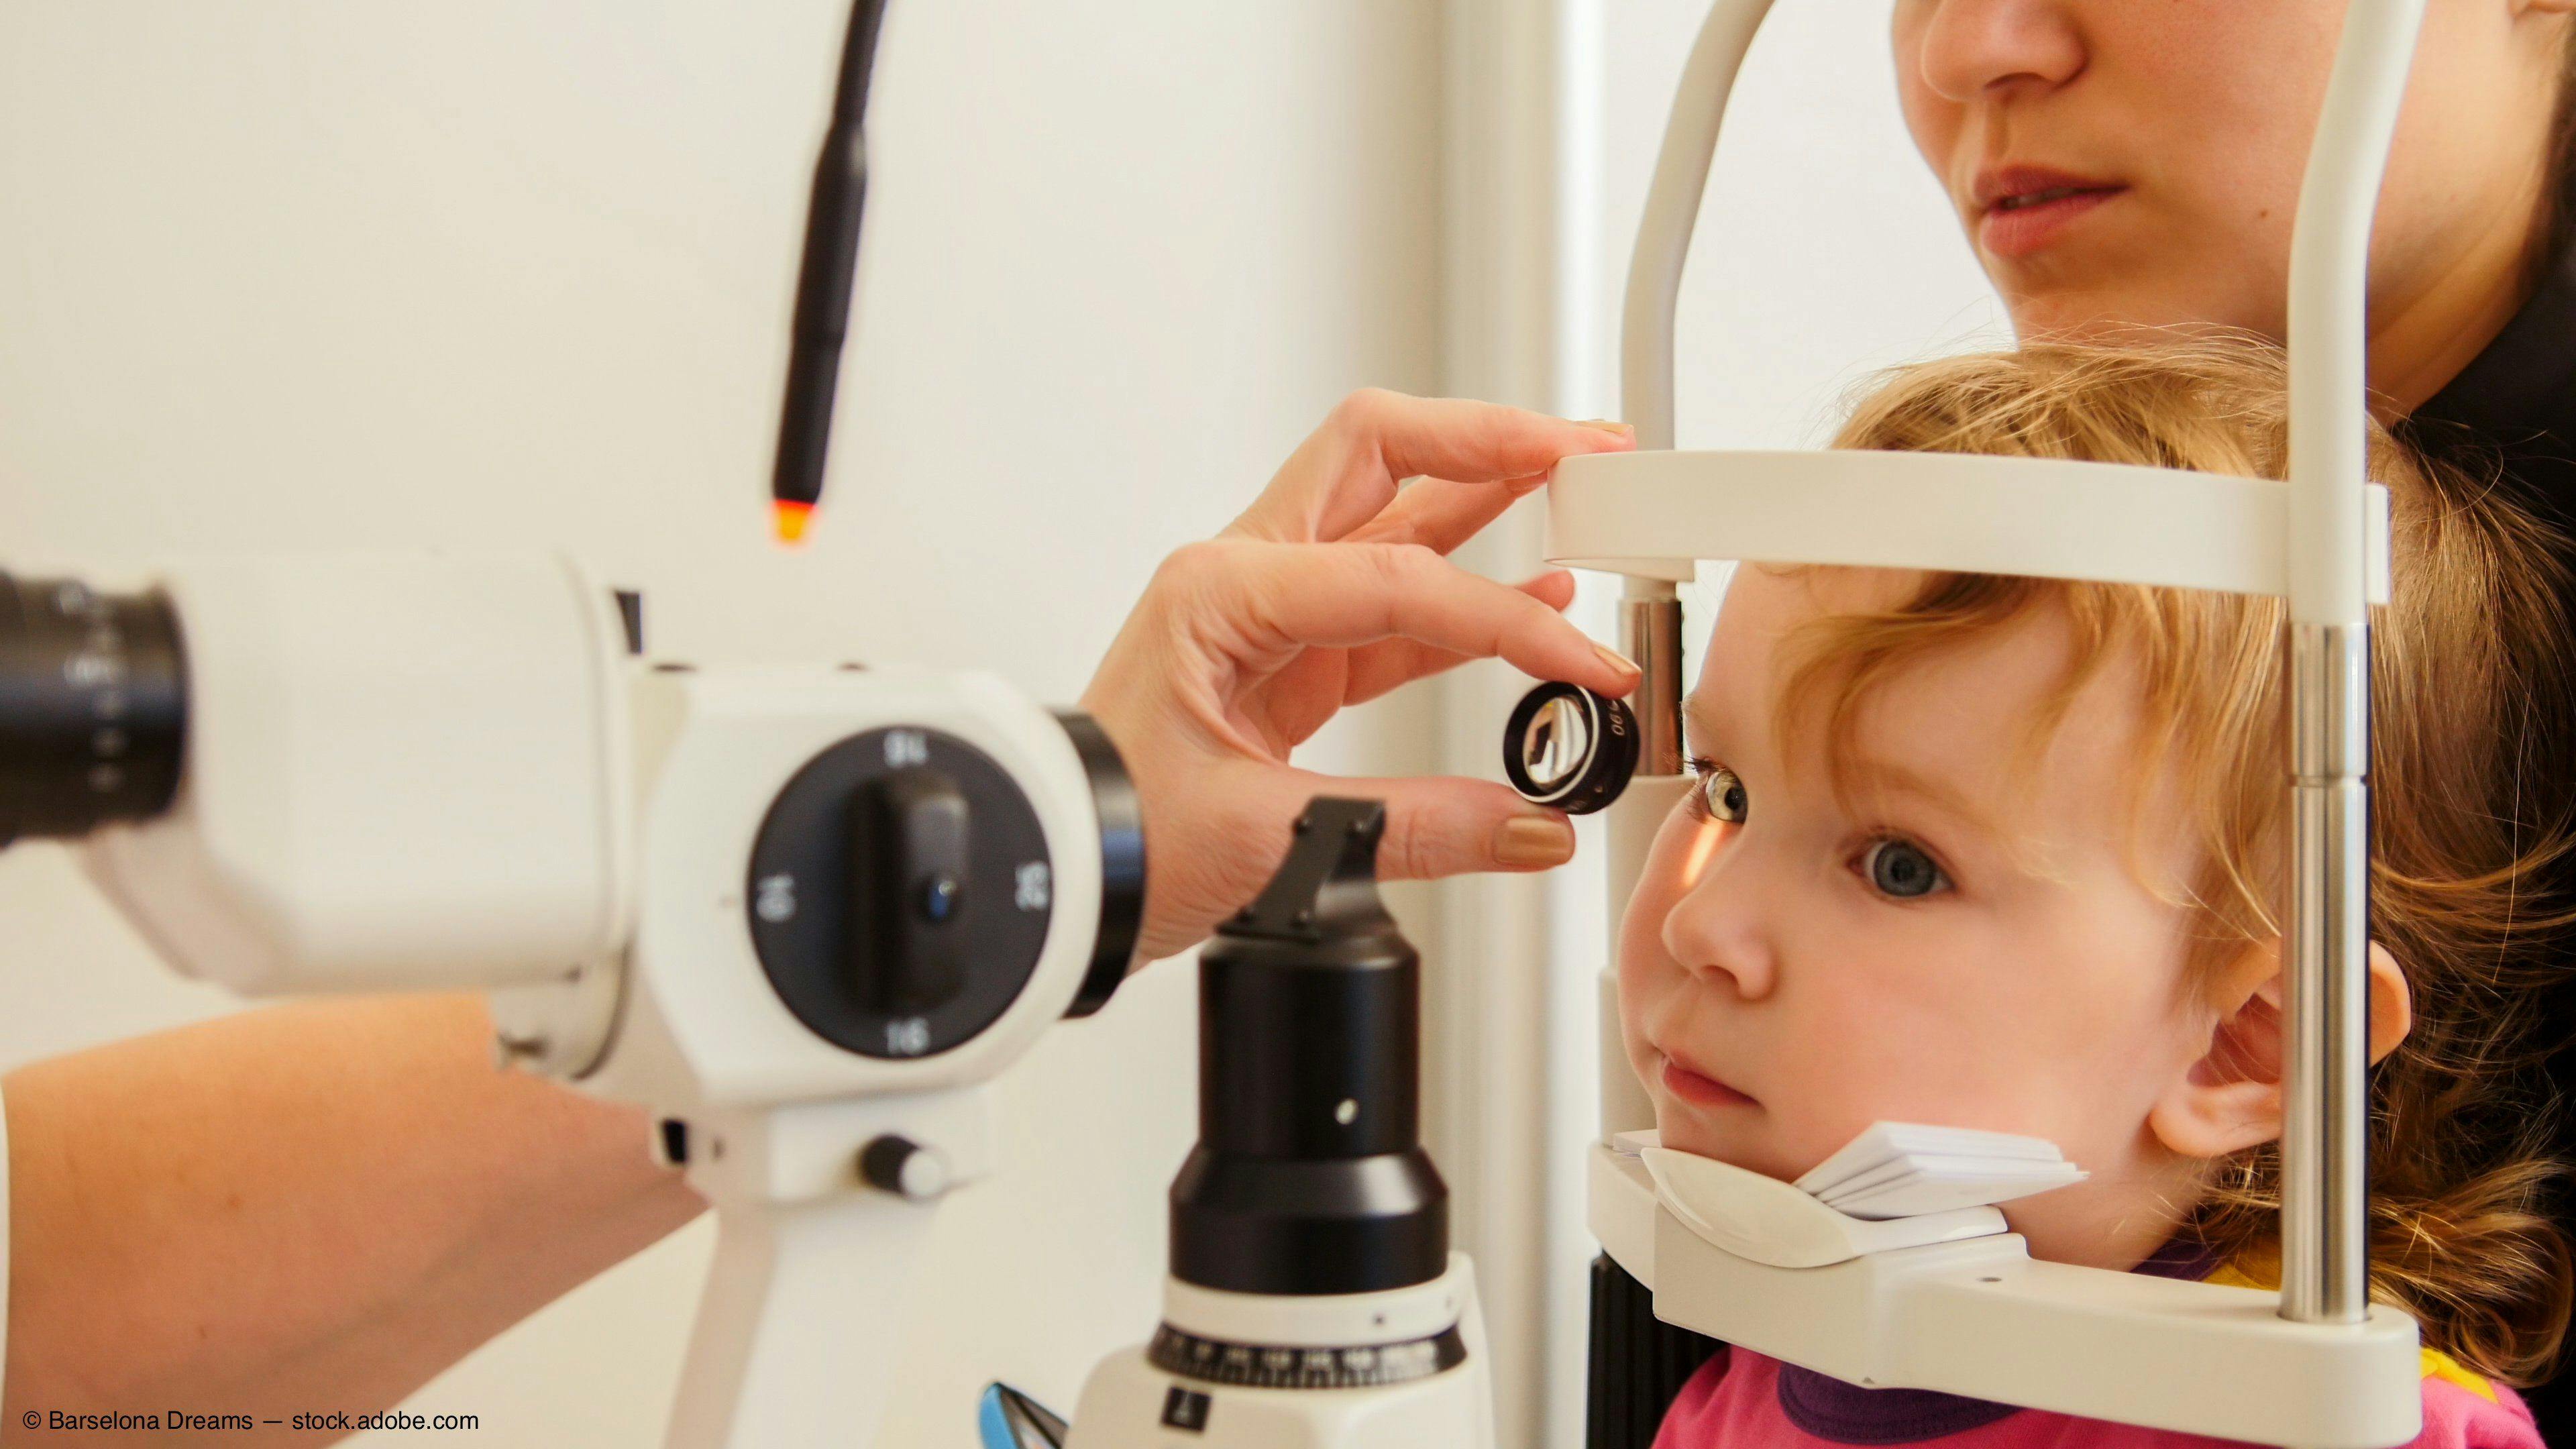 Microinvasive glaucoma surgery in children: Is there a role?